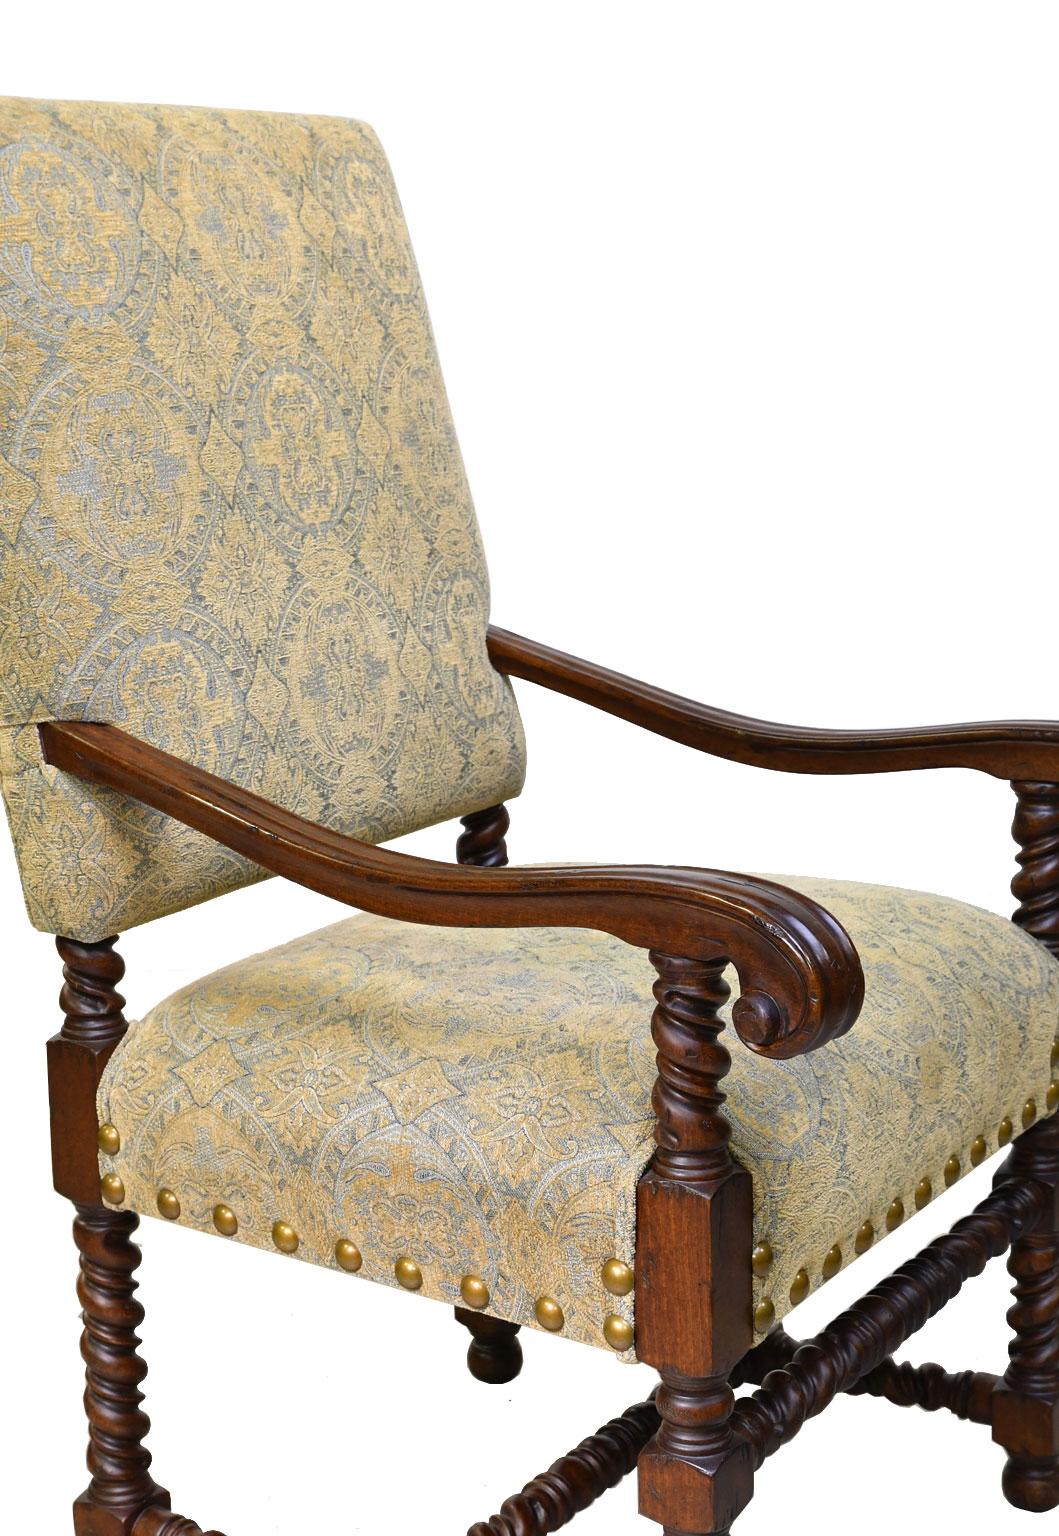 Set of Ten Upholstered Tudor-Style Dining Chairs with Turned Legs & Stretcher 6